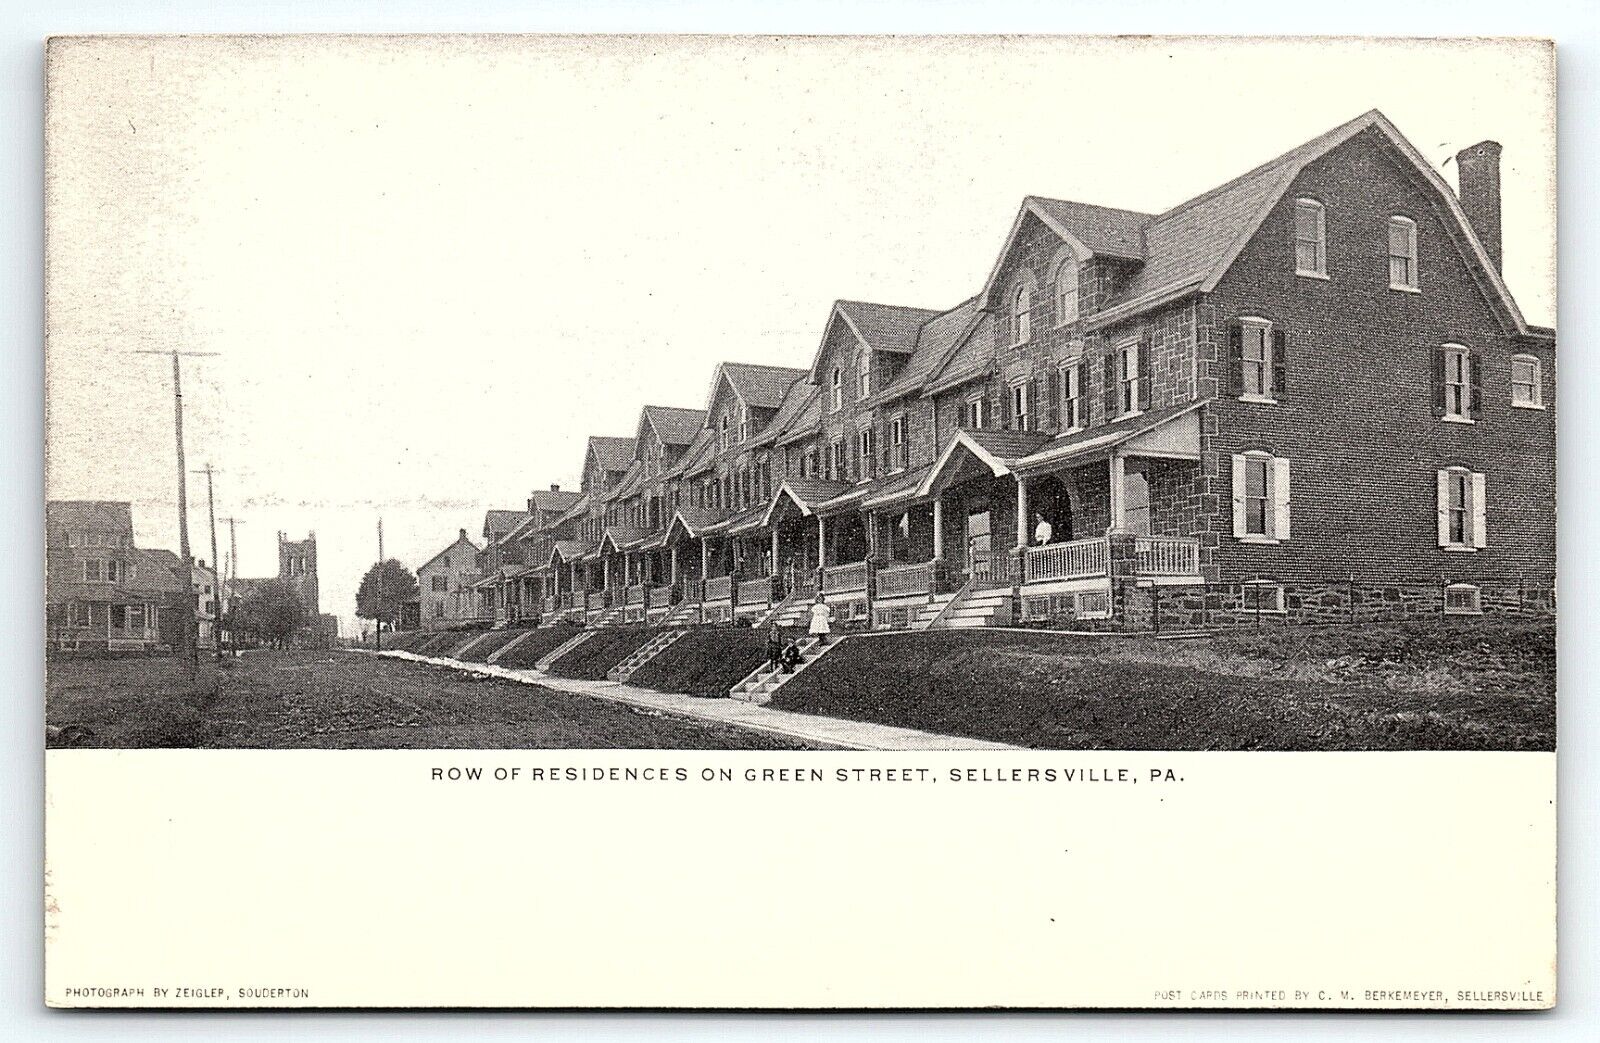 c1910 SELLERSVILLE PA ROW OF RESIDENCES ON GREEN STREET EARLY POSTCARD P4185